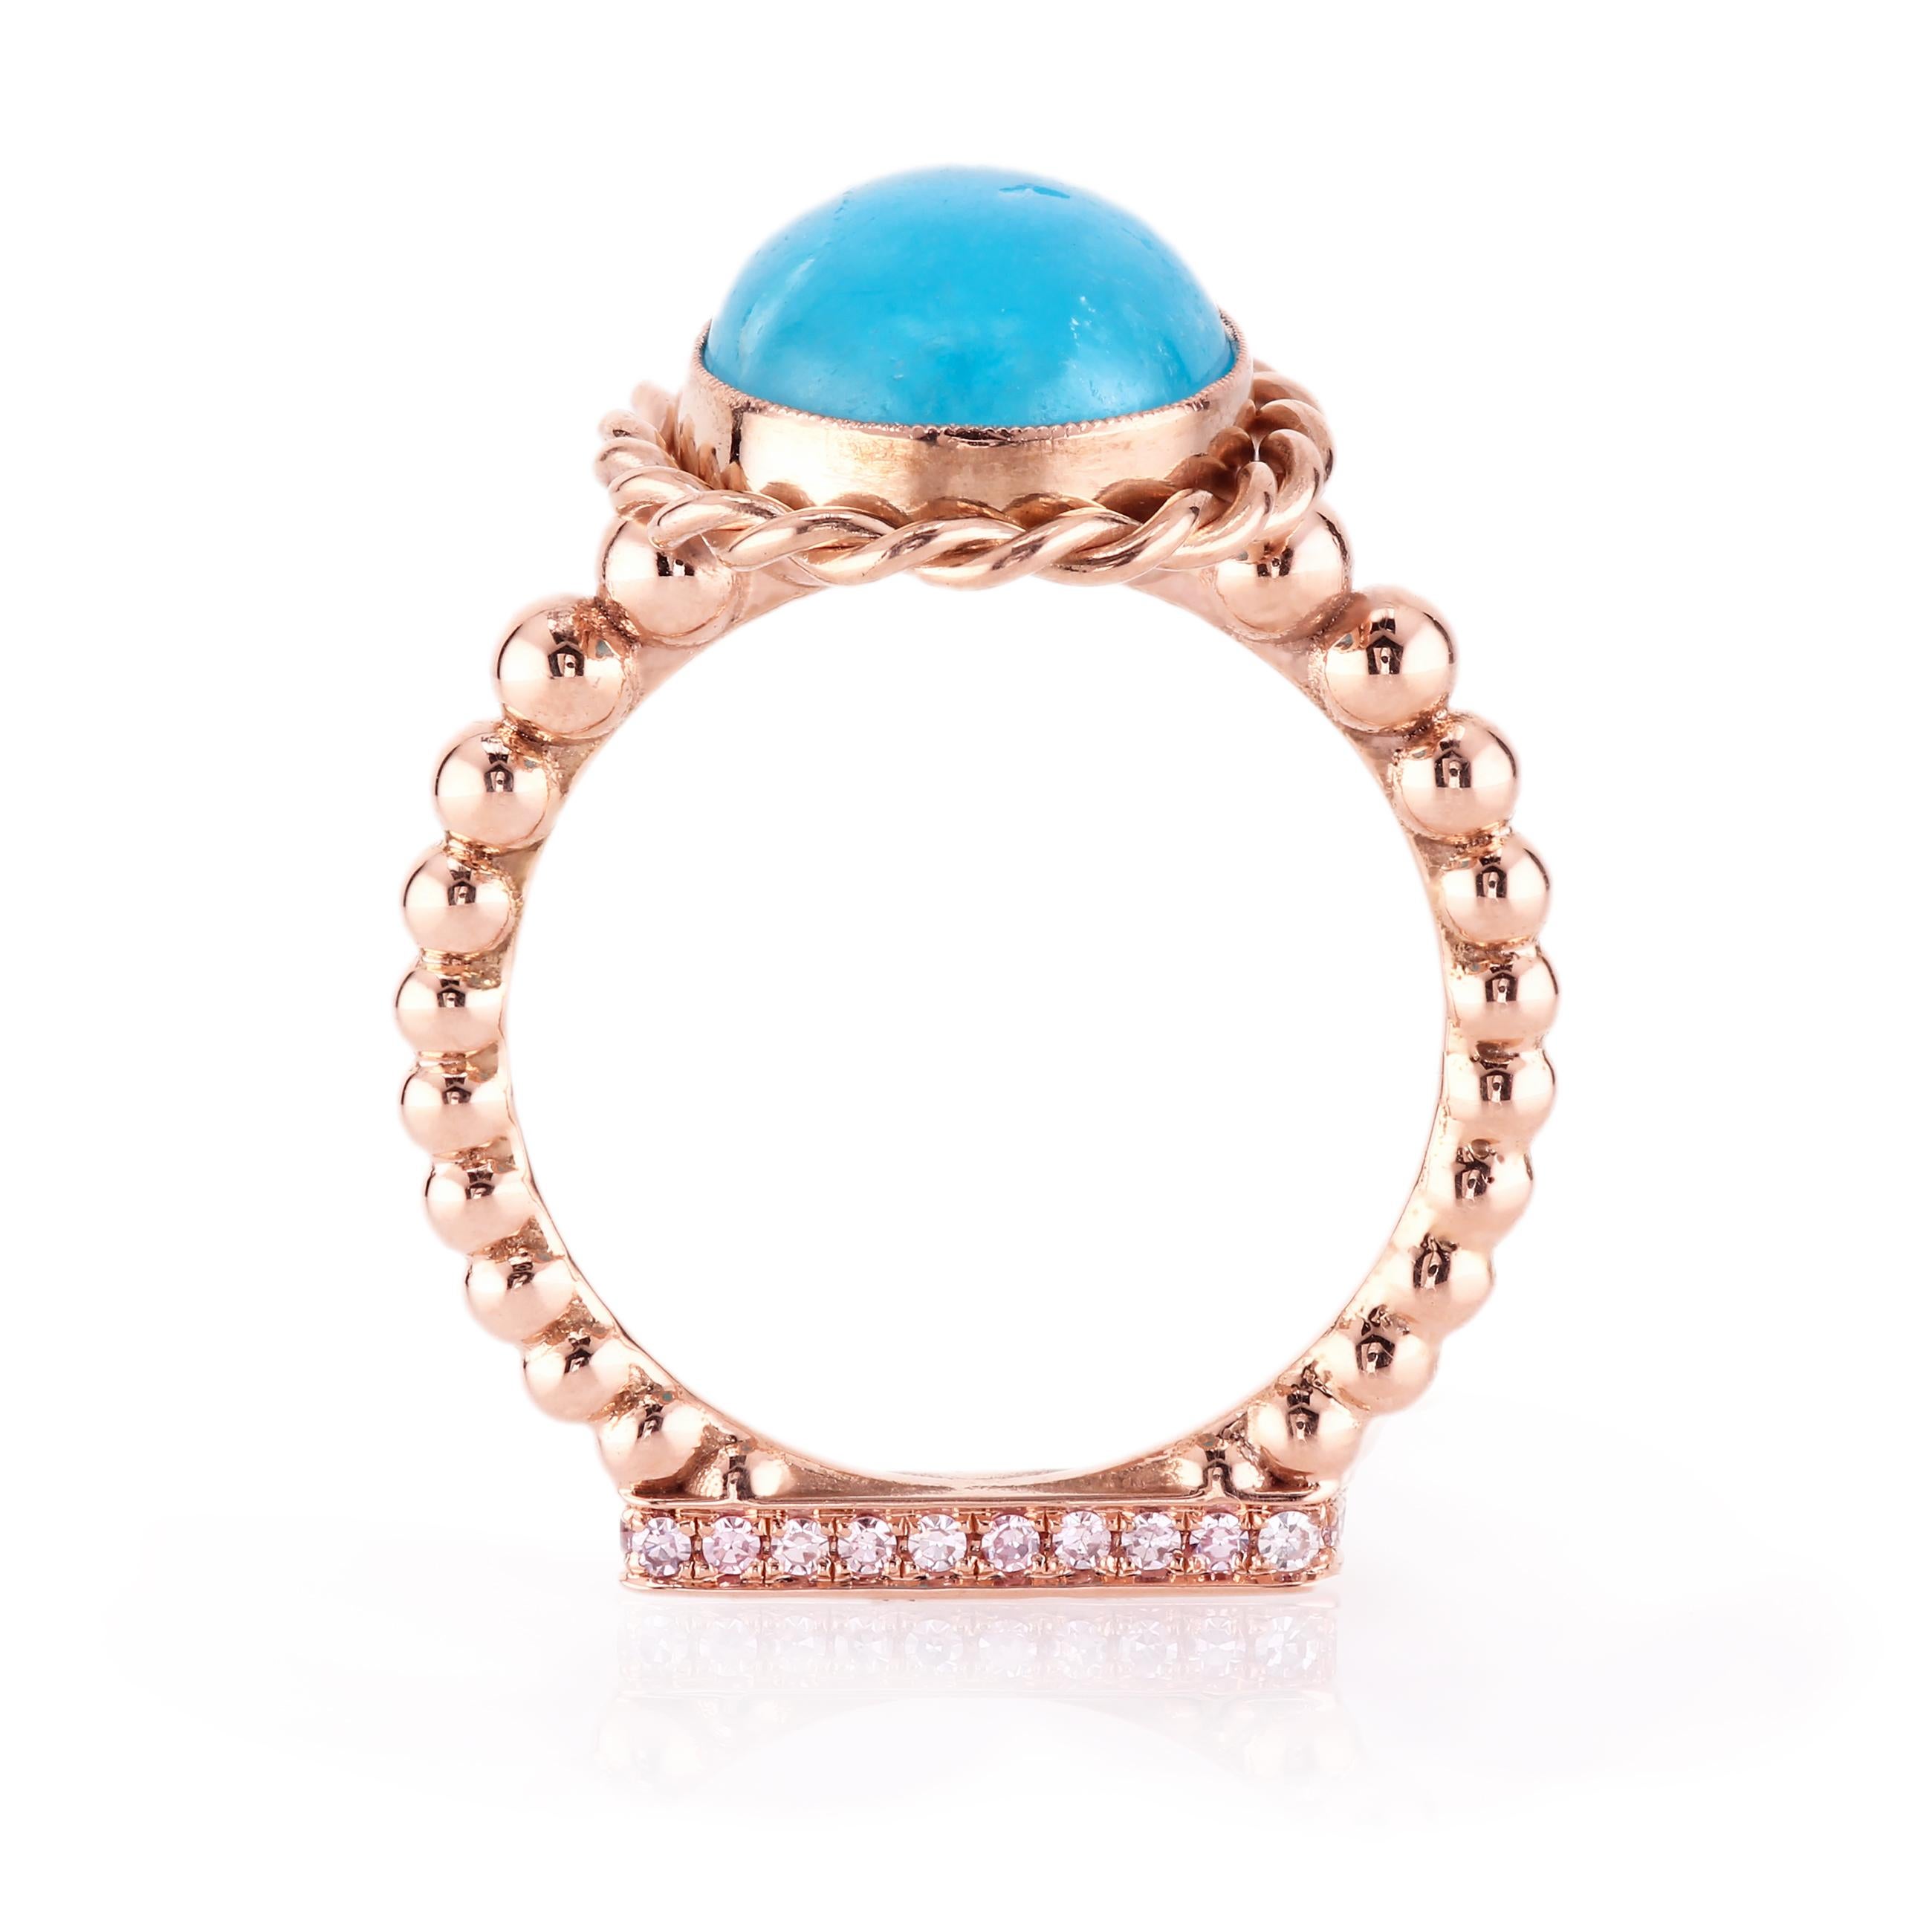 The pinnacle of American craftsmanship and design is on full display in this delicious 18 karat rose gold ring.
The ring is set with lovely hemimorphite cabochon chosen for its superlative quality and lovely blue color.
The stone's color mimics the